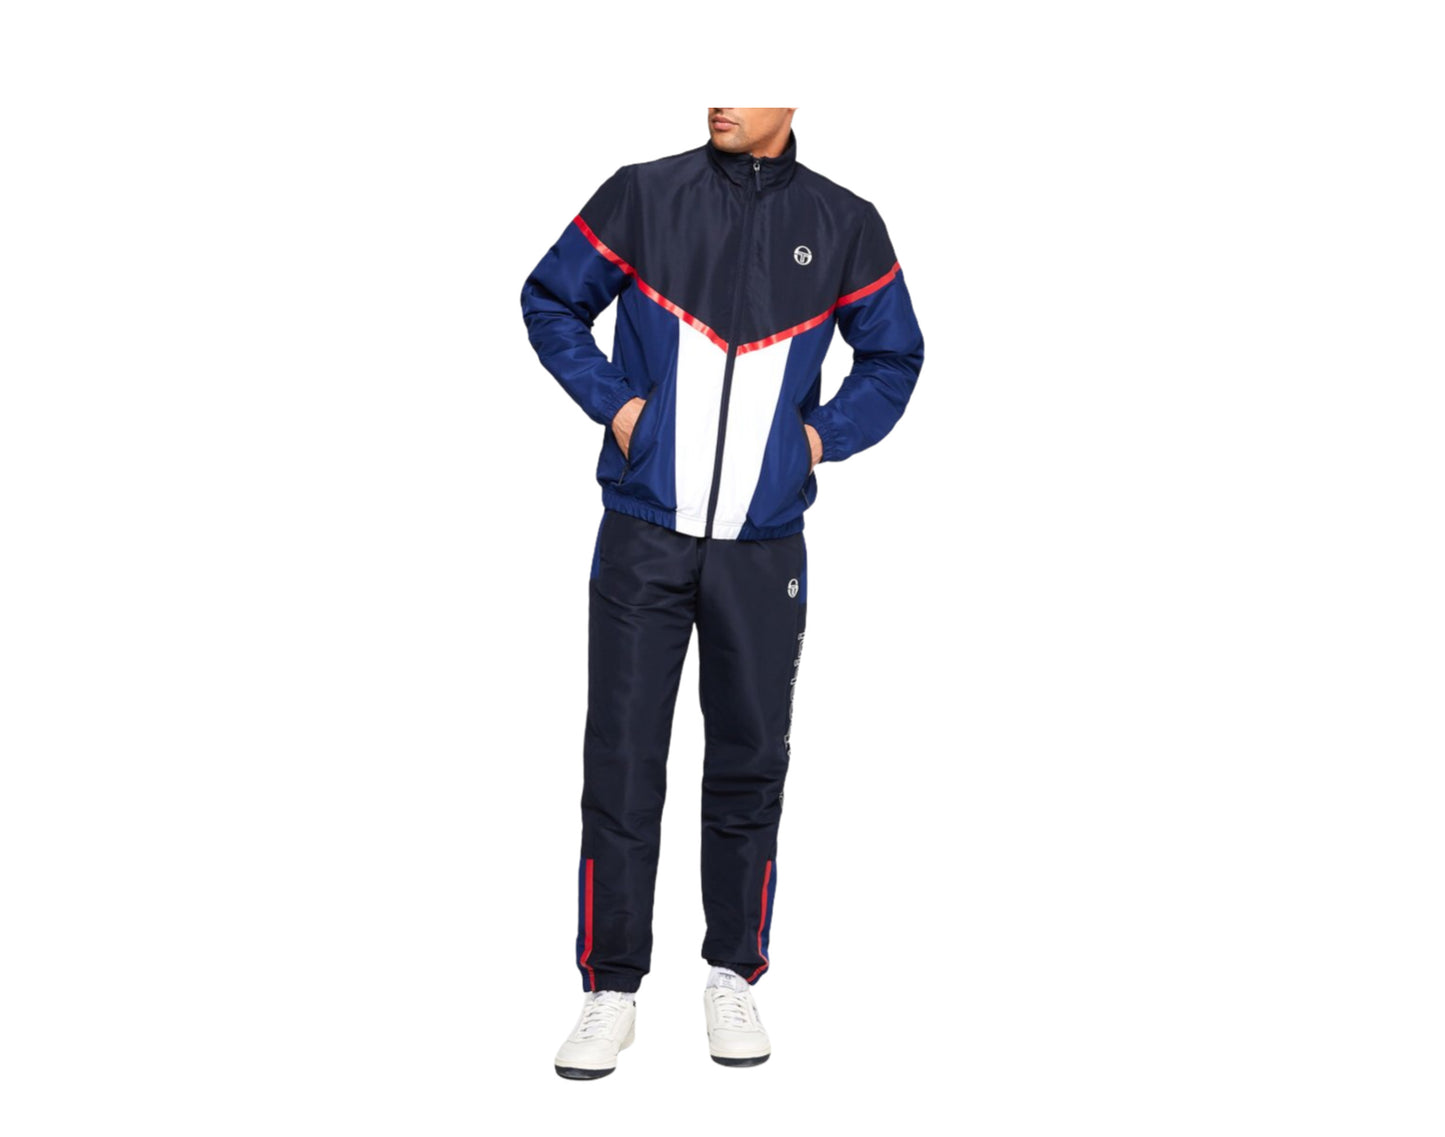 Sergio Tacchini Nulfont Tracksuit - Top and Bottom